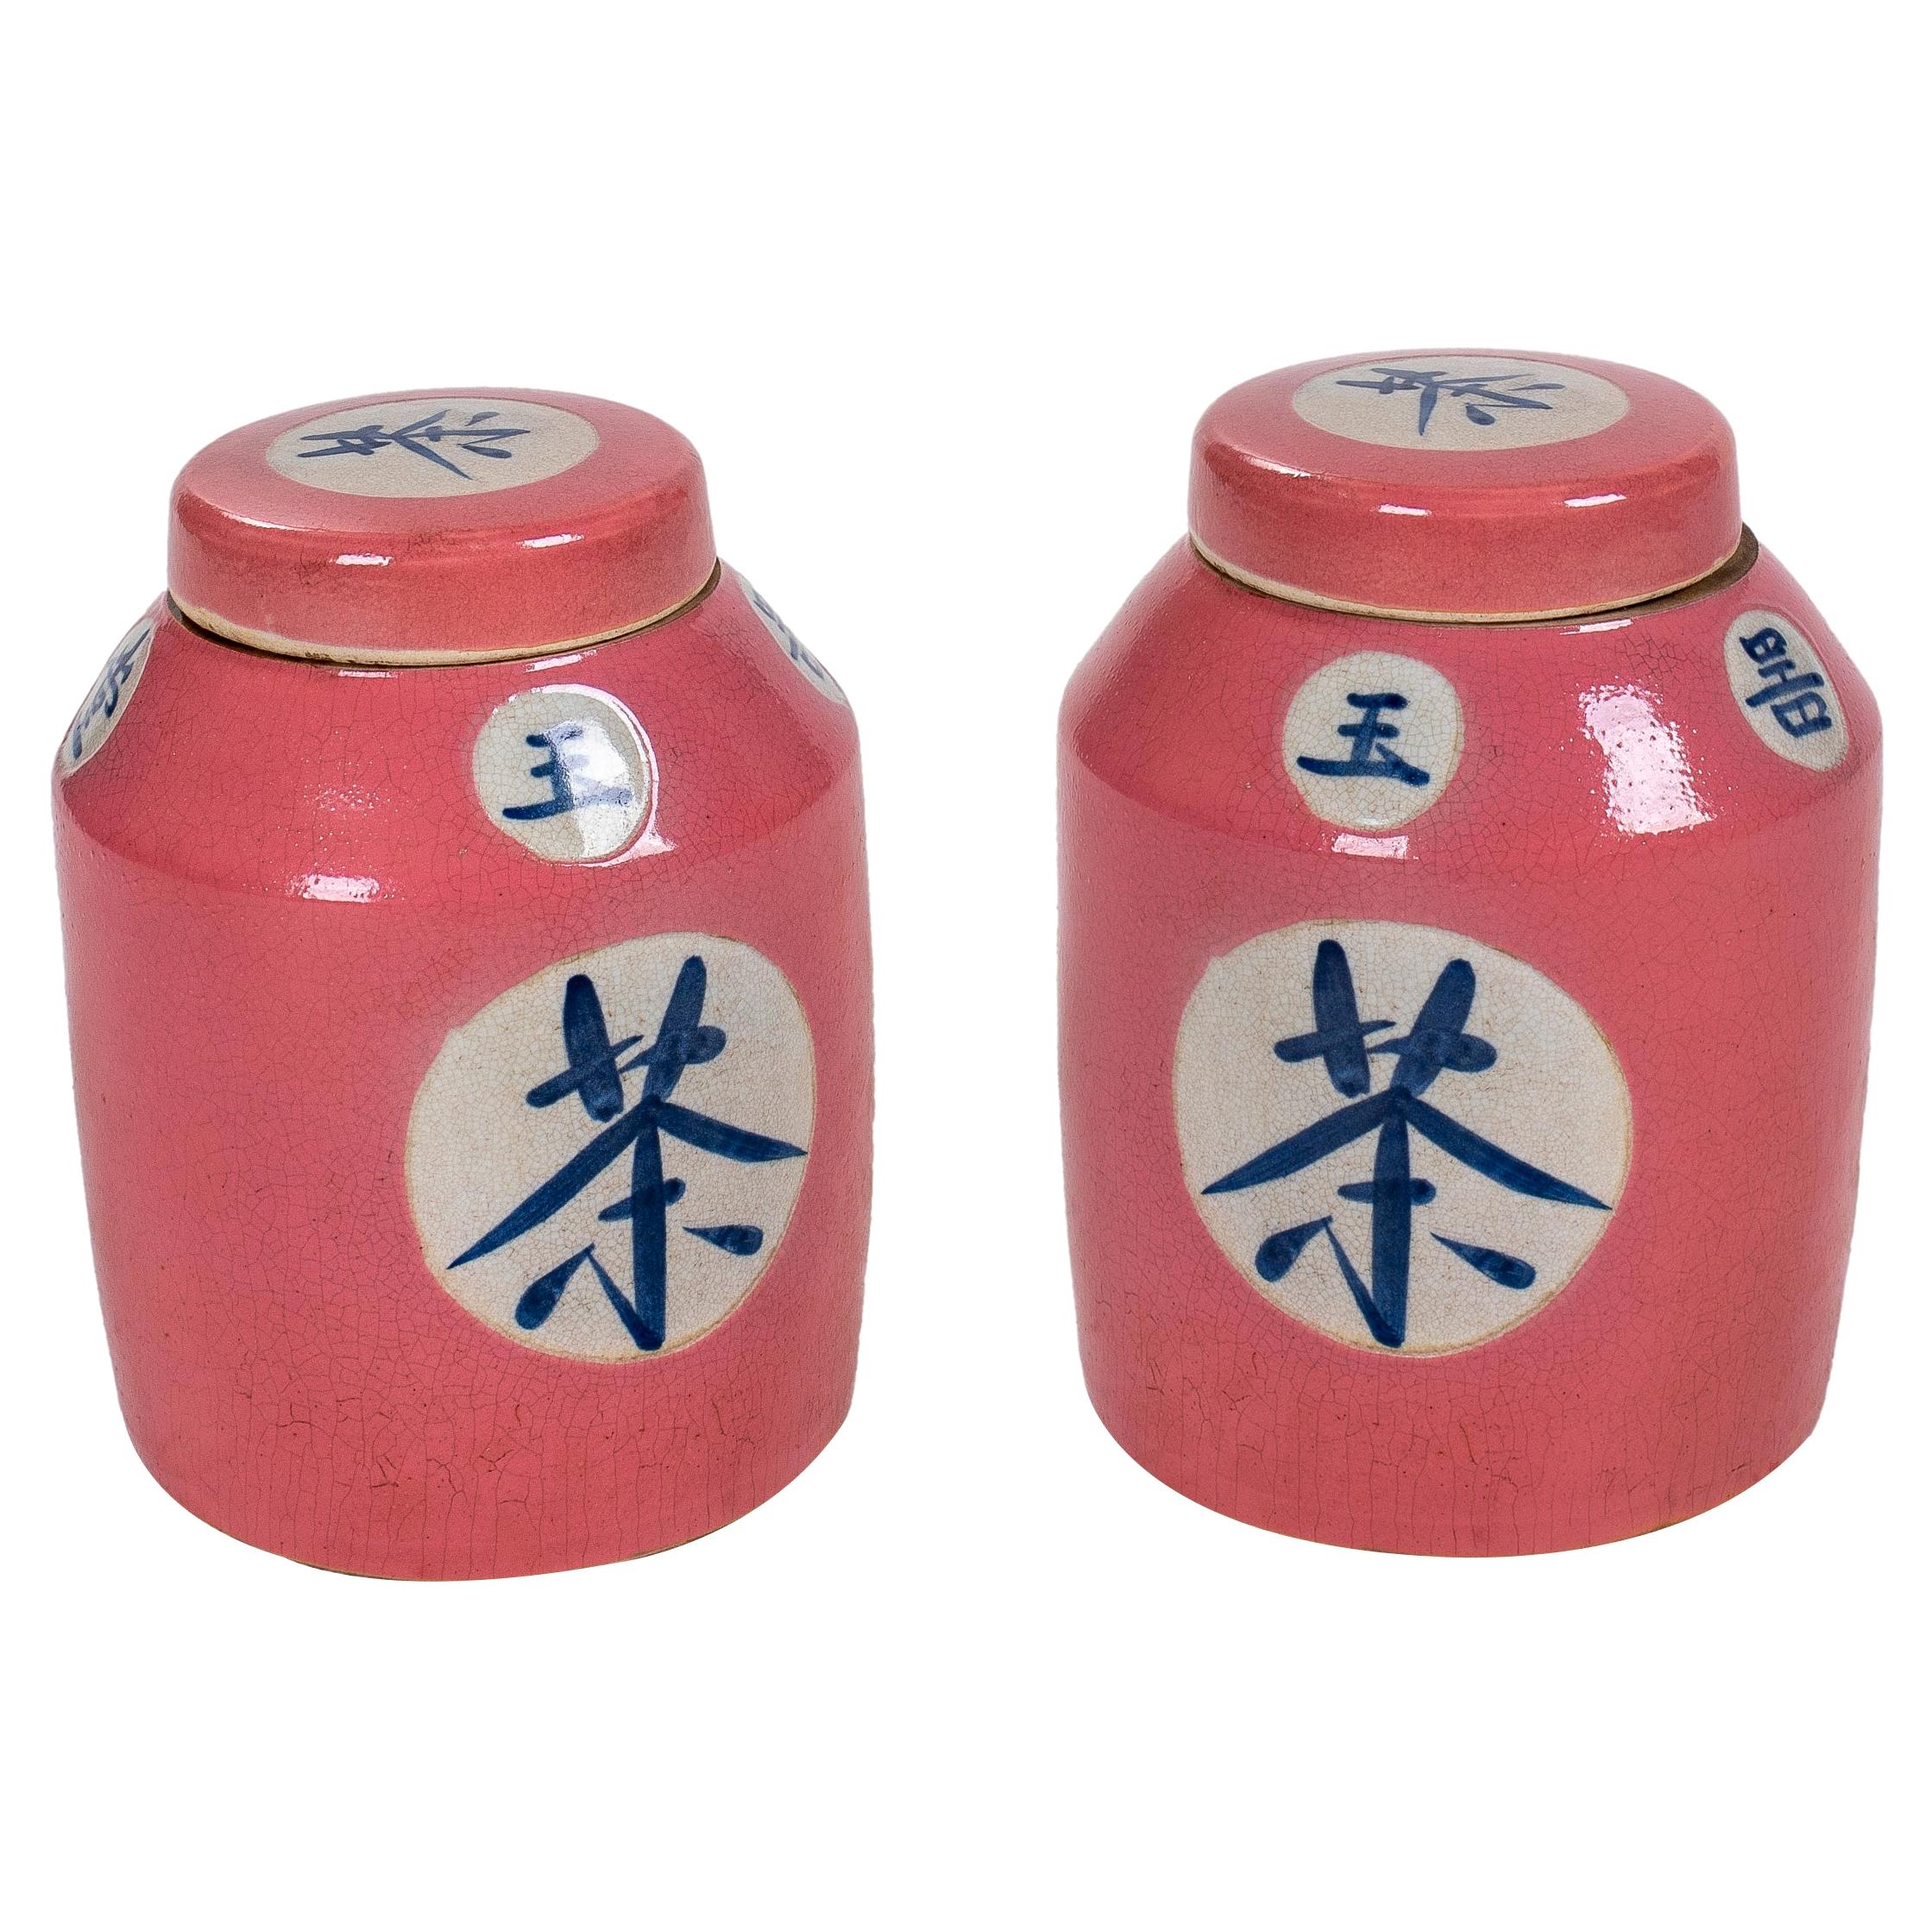 Pair of Asian Pink Glazed Porcelain Urns w/ Lids & Chinese Inscriptions For Sale